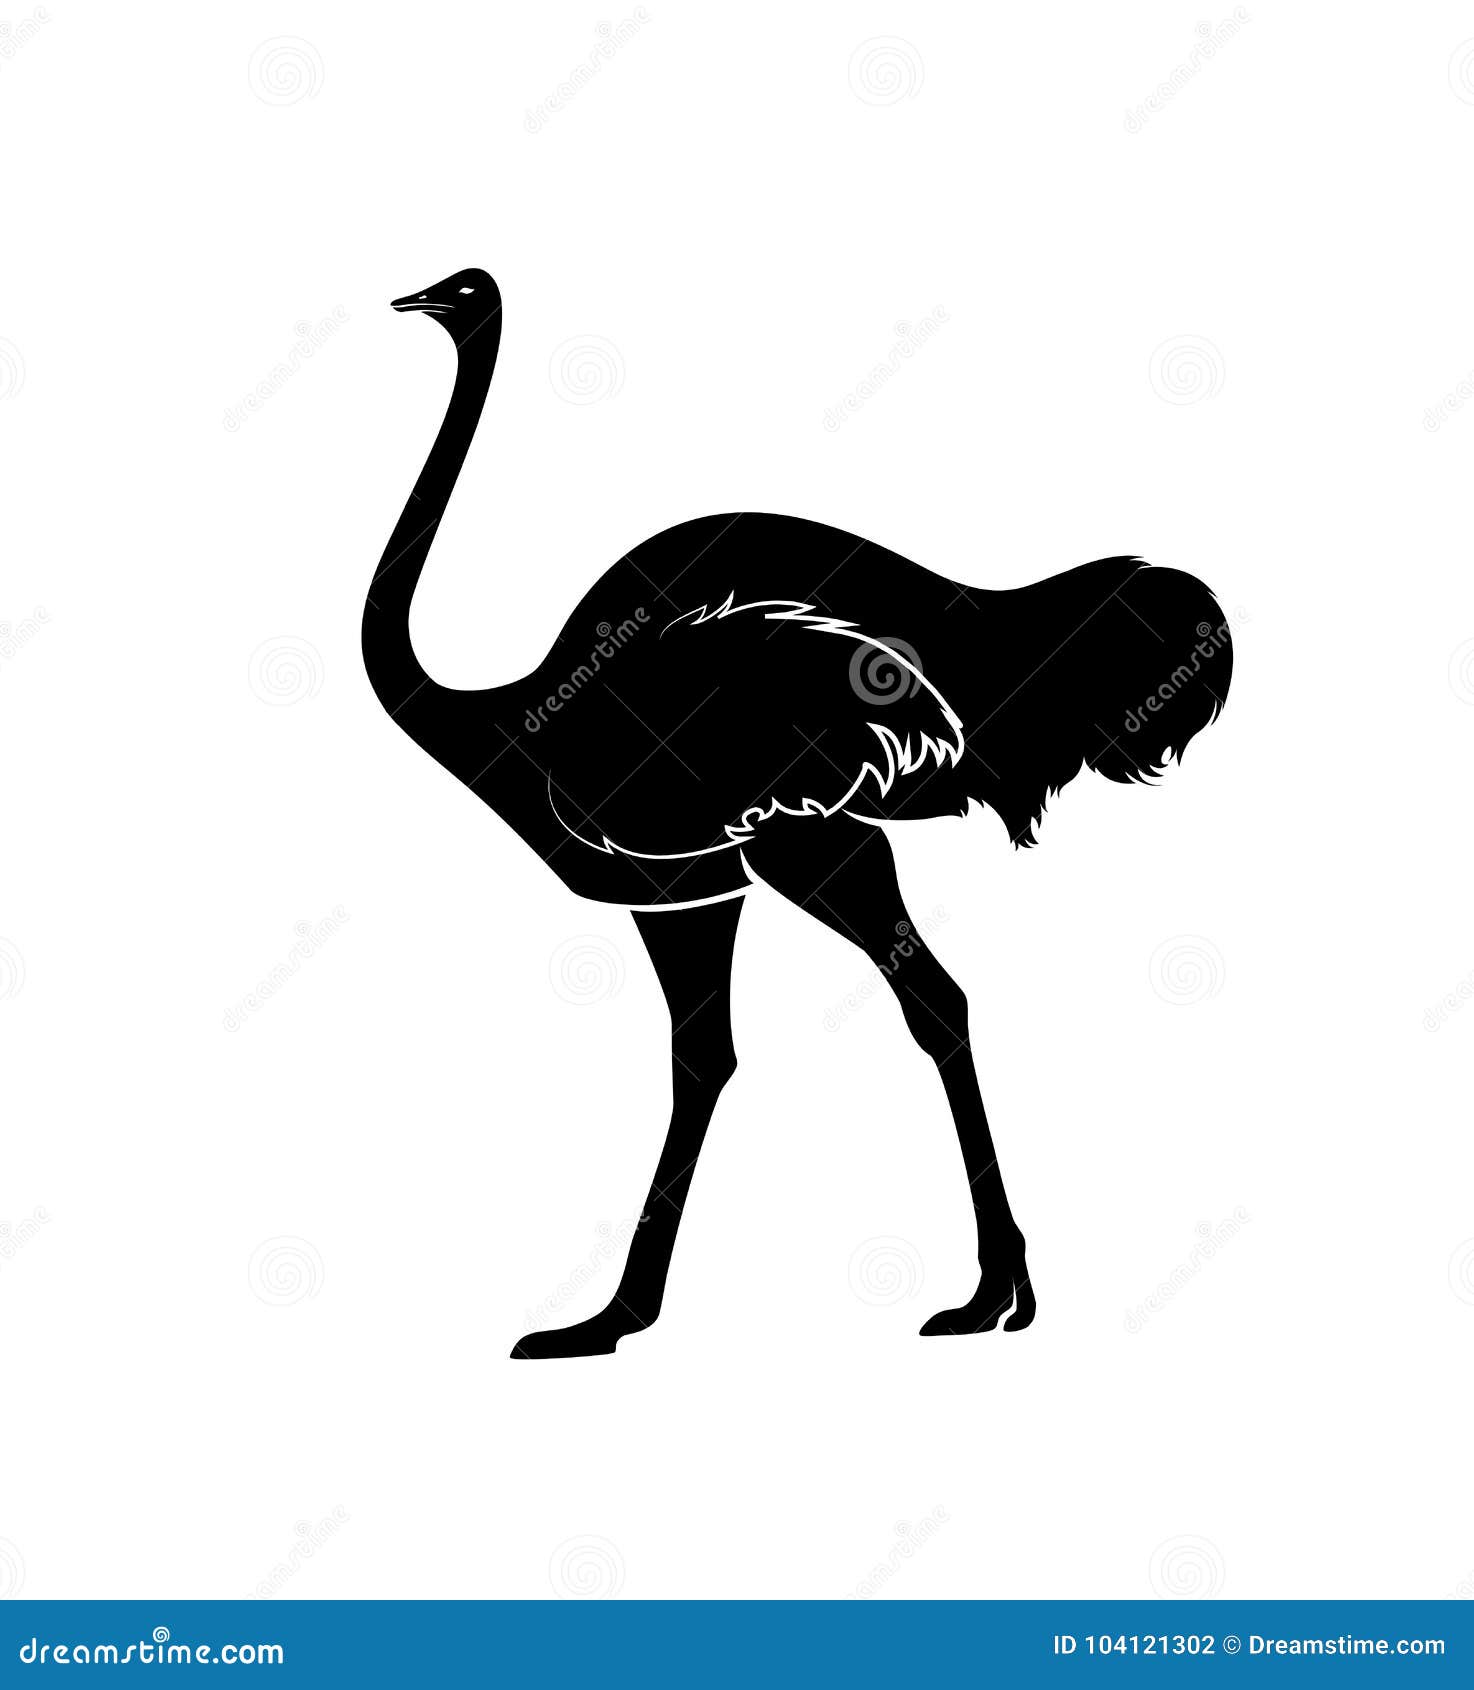 Download Ostrich Silhouette Vector stock vector. Illustration of ...